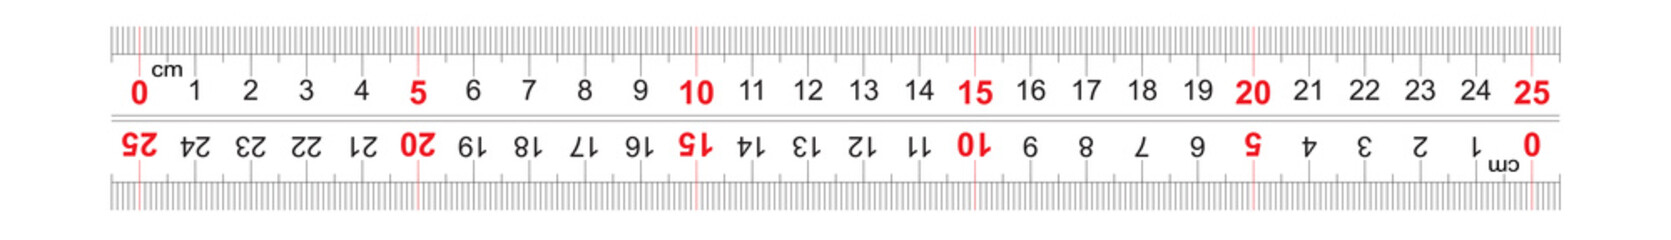 Ruler bidirectional double sided 250 millimeter, 25 centimeter. The division price is 1 mm. Precise measuring tool. Calibration grid.